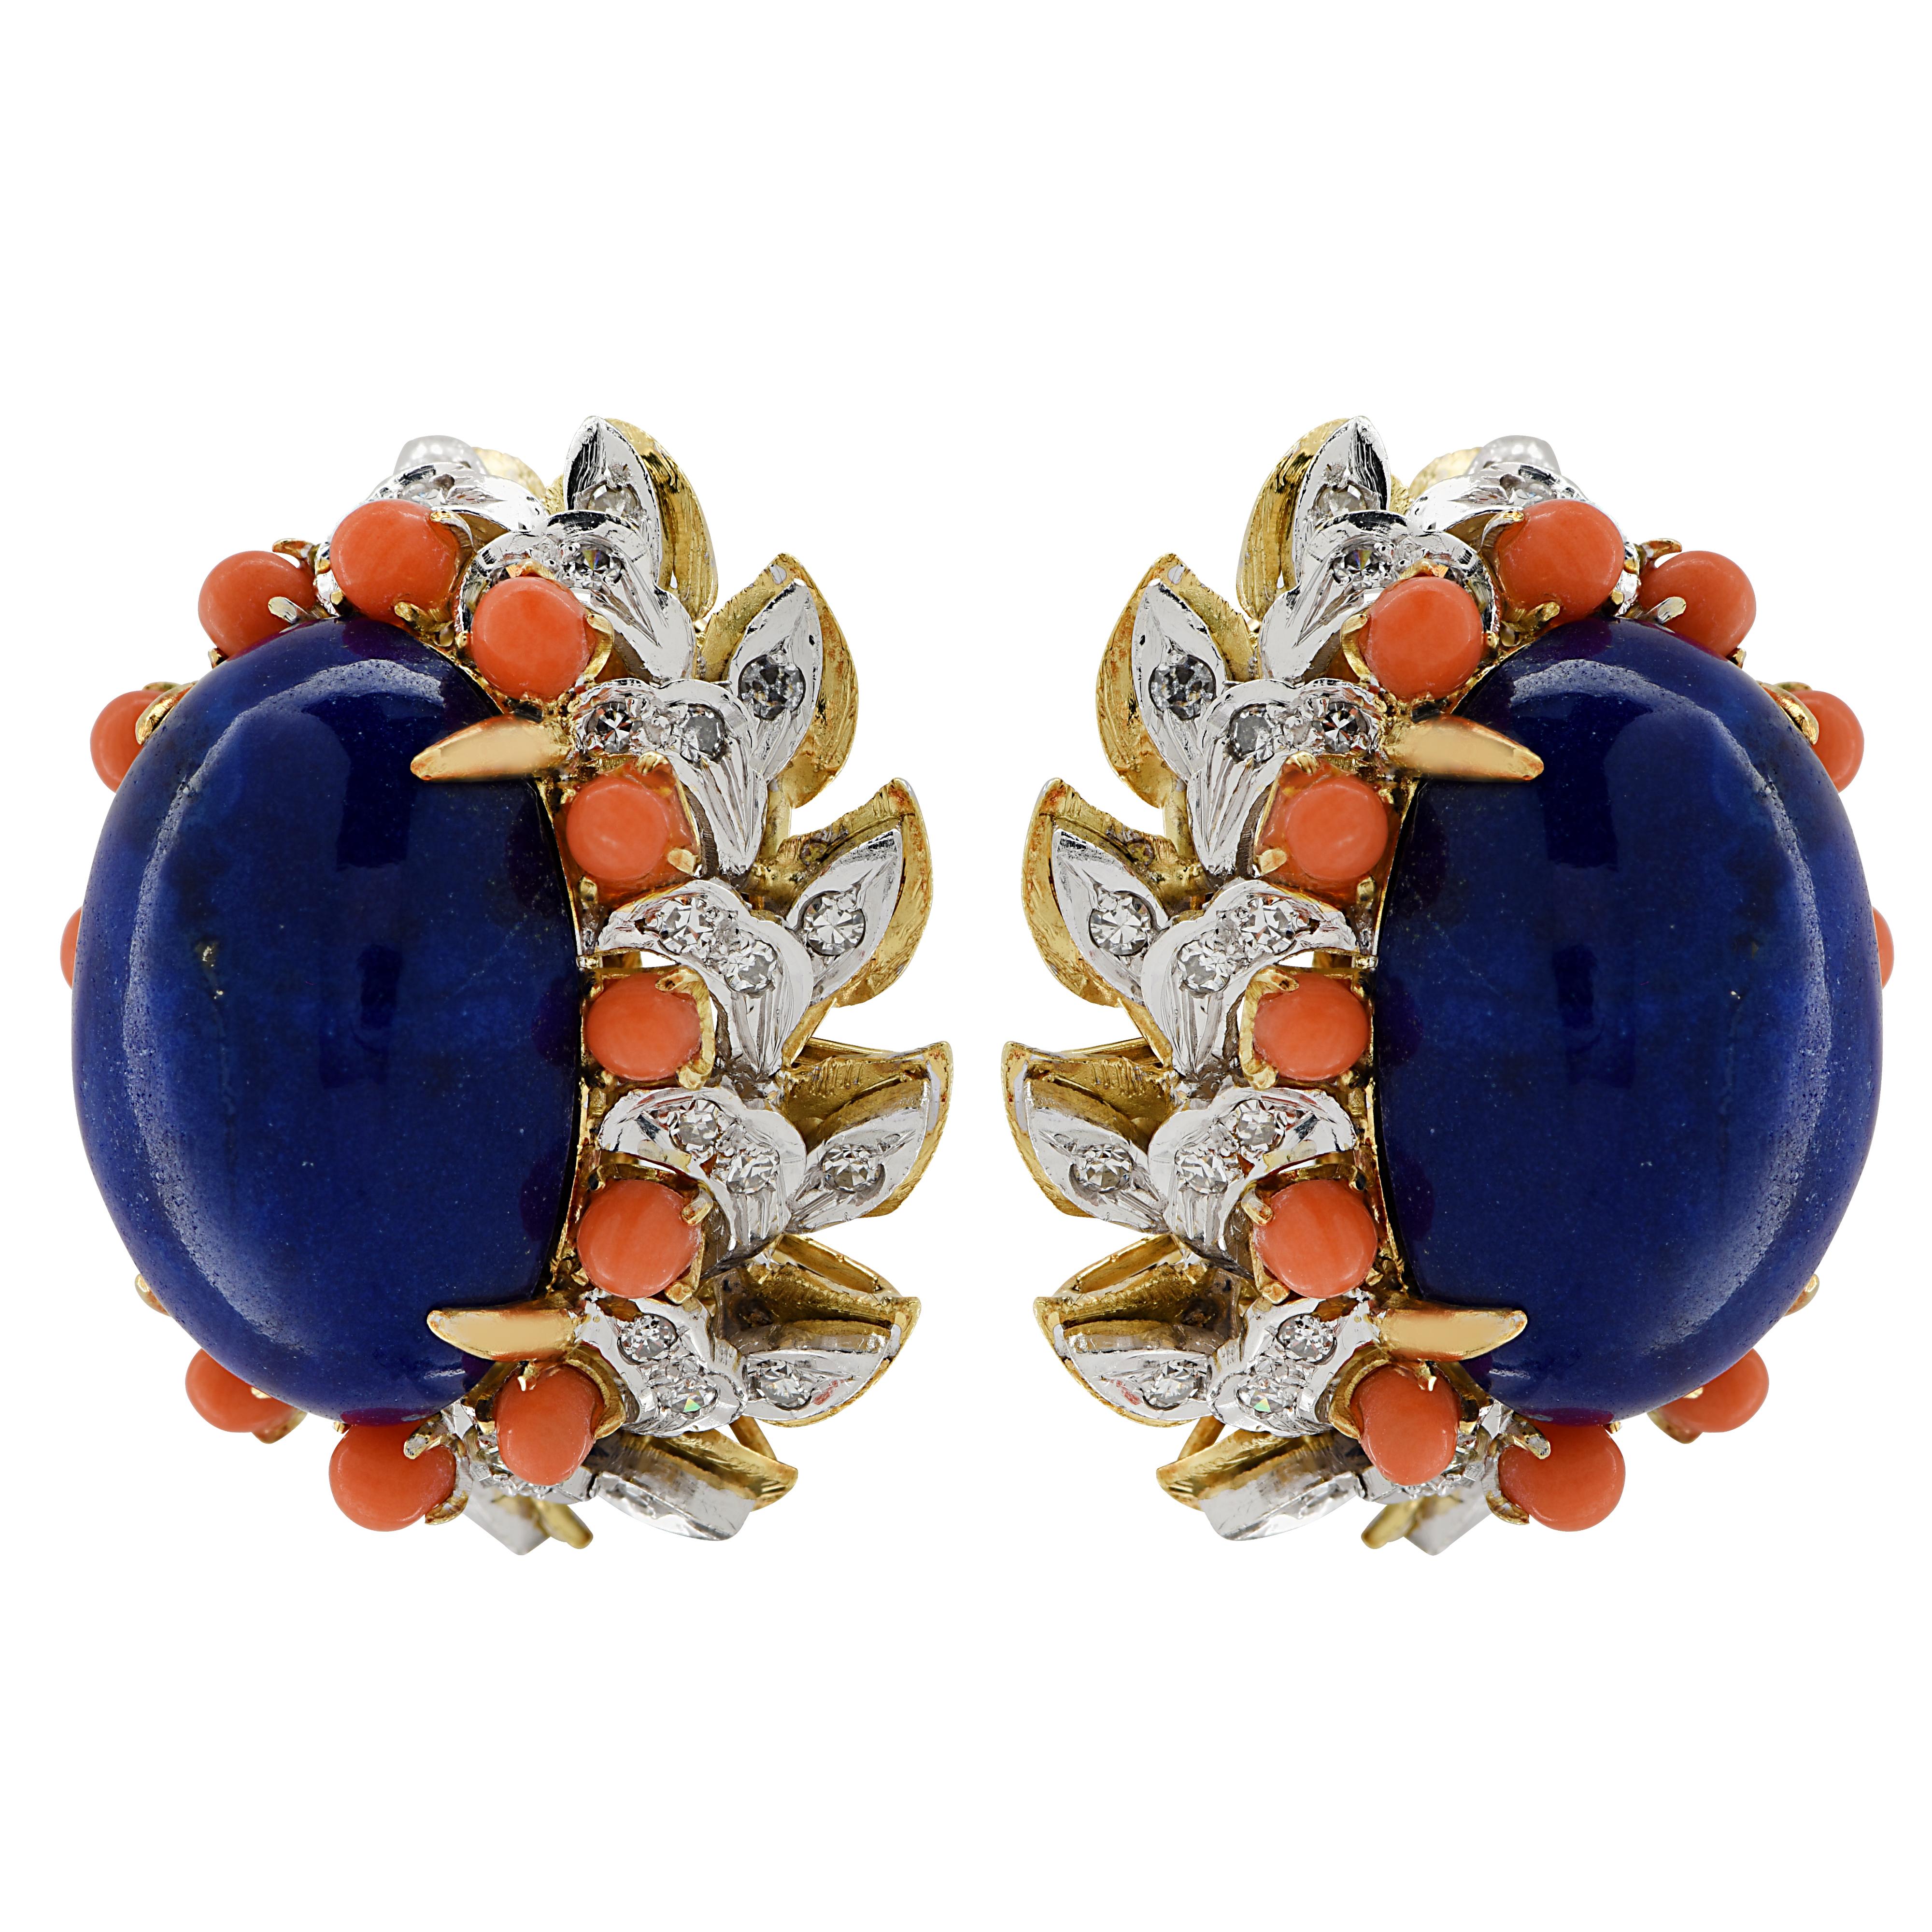 Striking clip-on earrings crafted in 18 karat yellow gold showcasing two stunning blue lapis cabochons framed with coral and diamonds. The earrings measure 27 mm in length, 23.75 mm in width and weighs 27.8 grams. 

Our pieces are all accompanied by